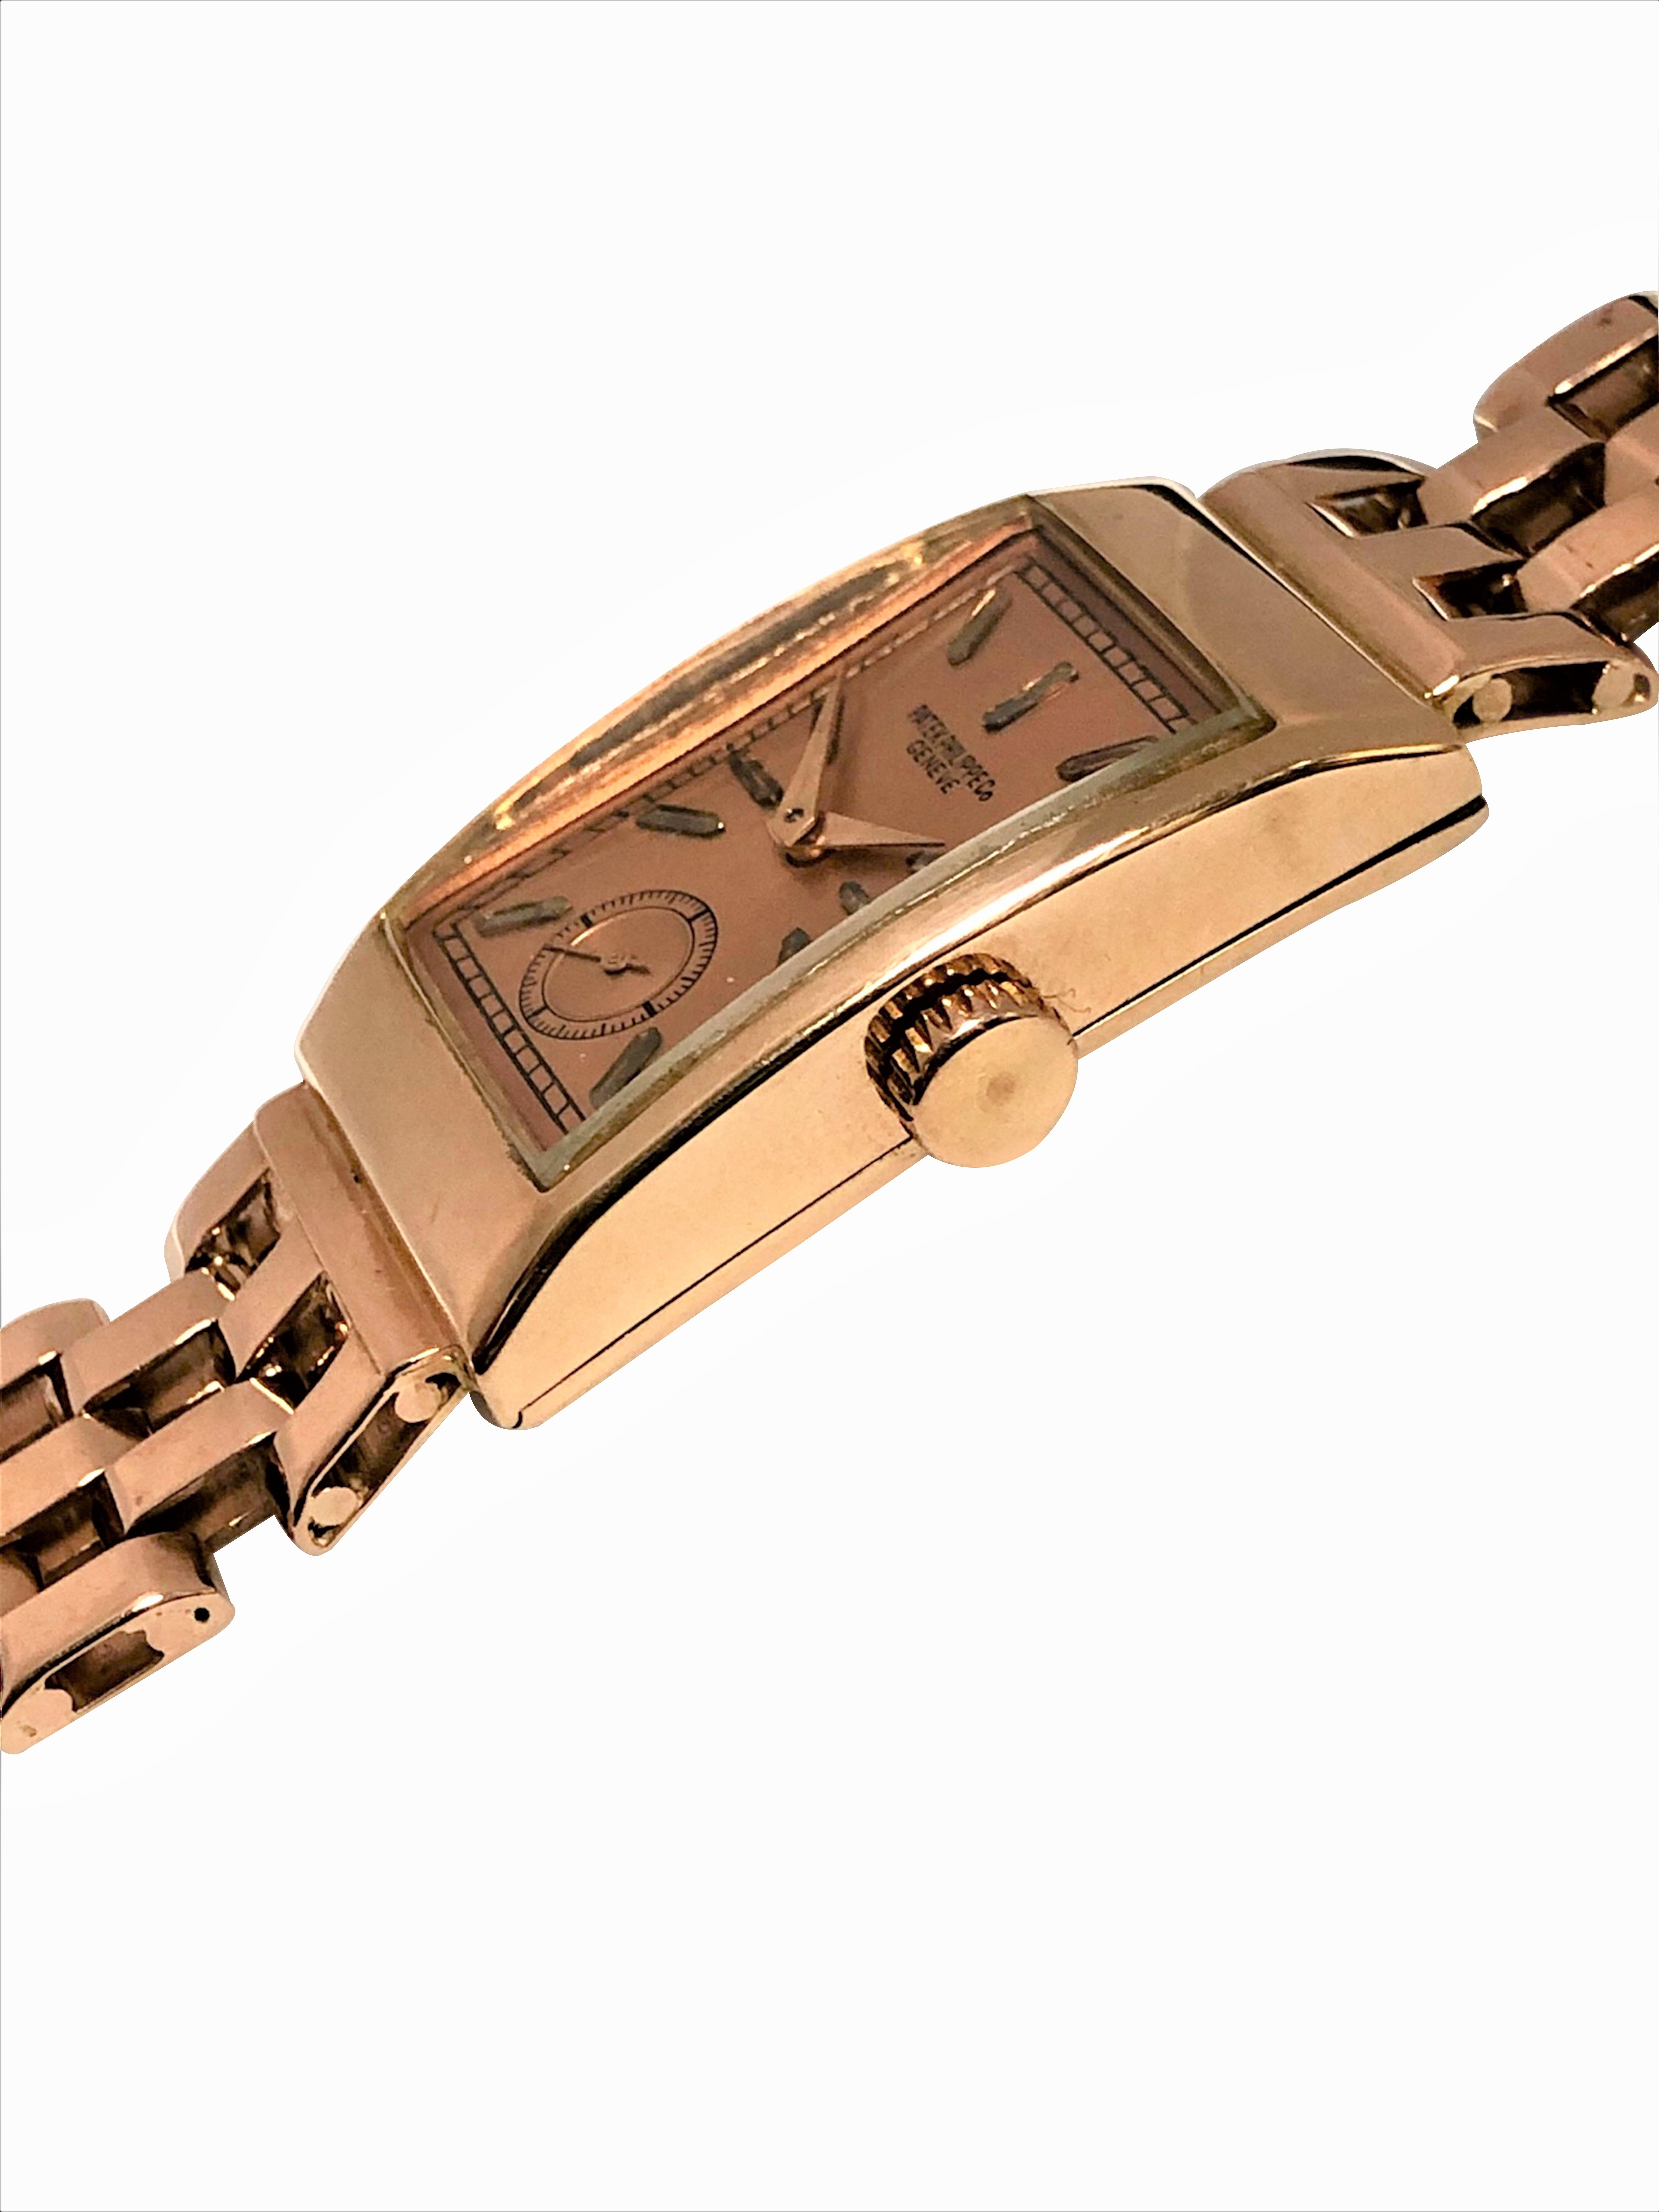 Circa 1940s Patek Philippe, 34 X 20 M.M. Rectangular 2 Piece 18K Rose Gold Case, 18 Jewel Mechanical, Manual wind Nickel Lever Movement, Matt Rose finished dial with Raised Rose Gold markers and Rose Gold hands. 5/8 inch wide 14k Rose Gold Brick